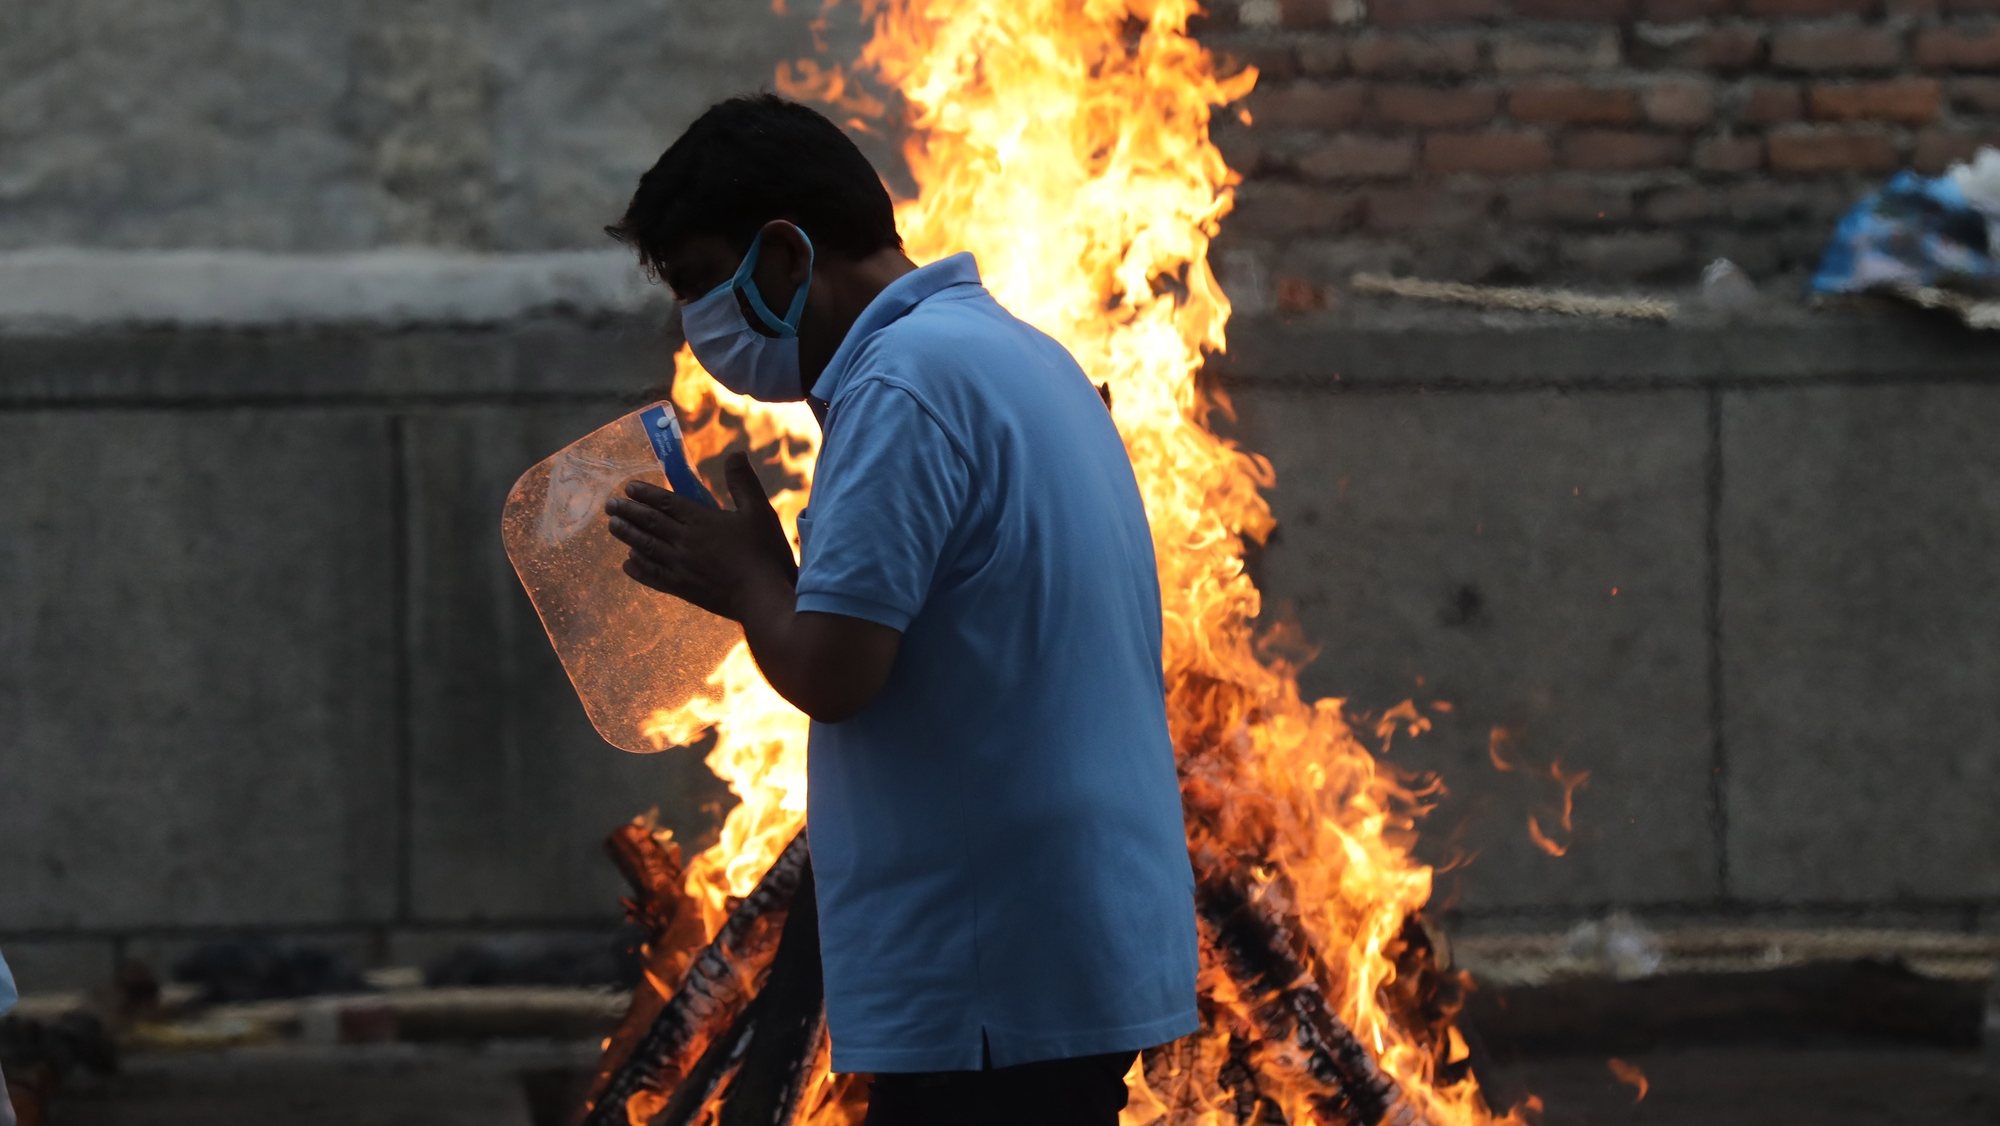 epa09209134 Relatives perform the last rites for a COVID-19 victim at a crematorium in New Delhi, India, 18 May 2021. India surpassed 25 million cases of the coronavirus on 18 May since the start of the pandemic, despite a decline in infections in recent days, while also recording a new daily record of 4,329 deaths. The country registered 263,533 infections in the last 24 hours, according to data from the Indian Ministry of Health, the lowest number in a month after India reported a record of over 400,000 cases everyday two weeks ago.  EPA/RAJAT GUPTA